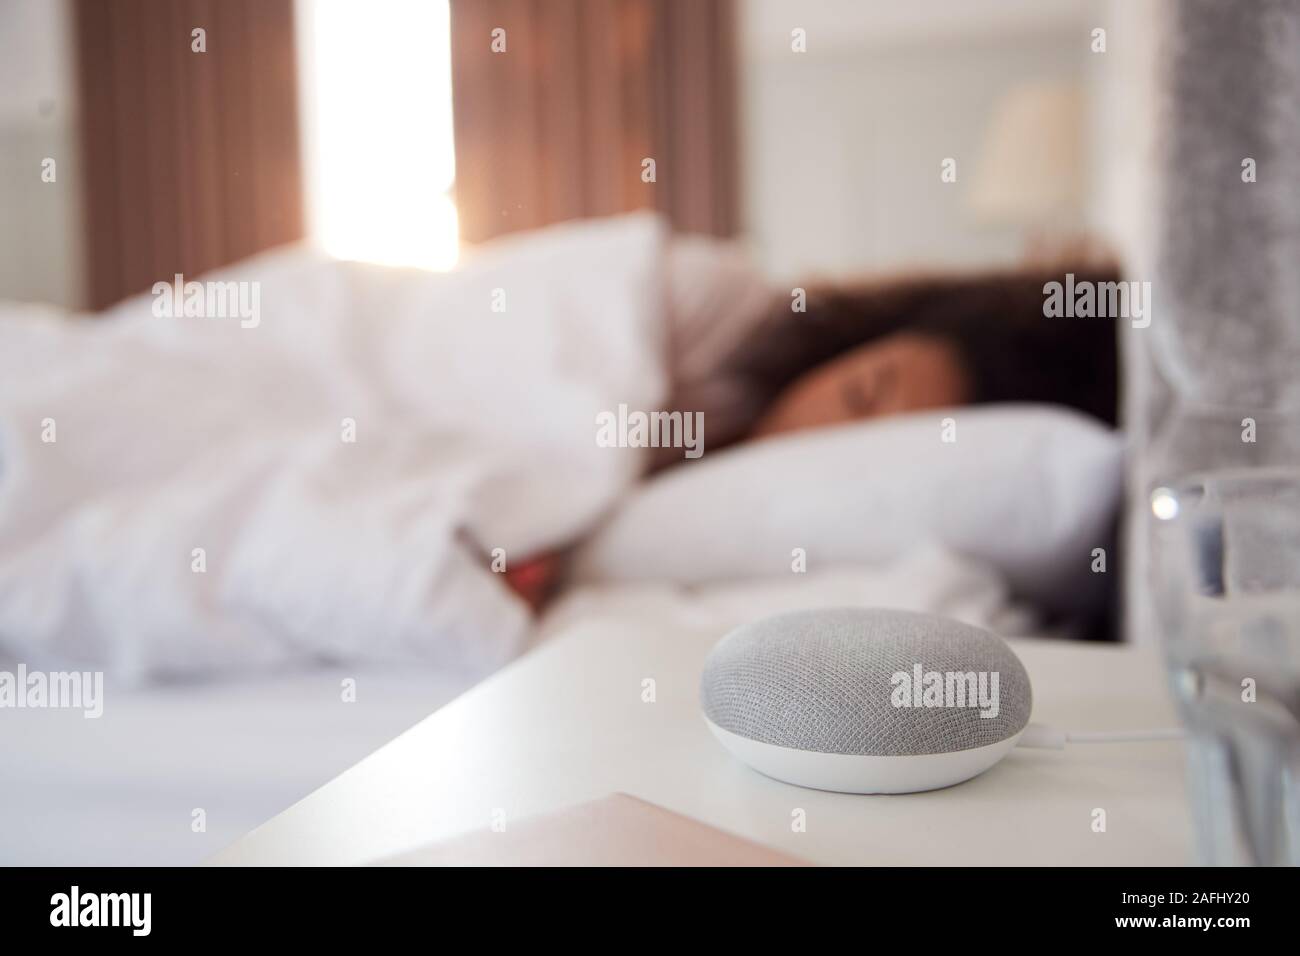 Woman Sleeping In Bed With Voice Assistant On Bedside Table Next To Her Stock Photo